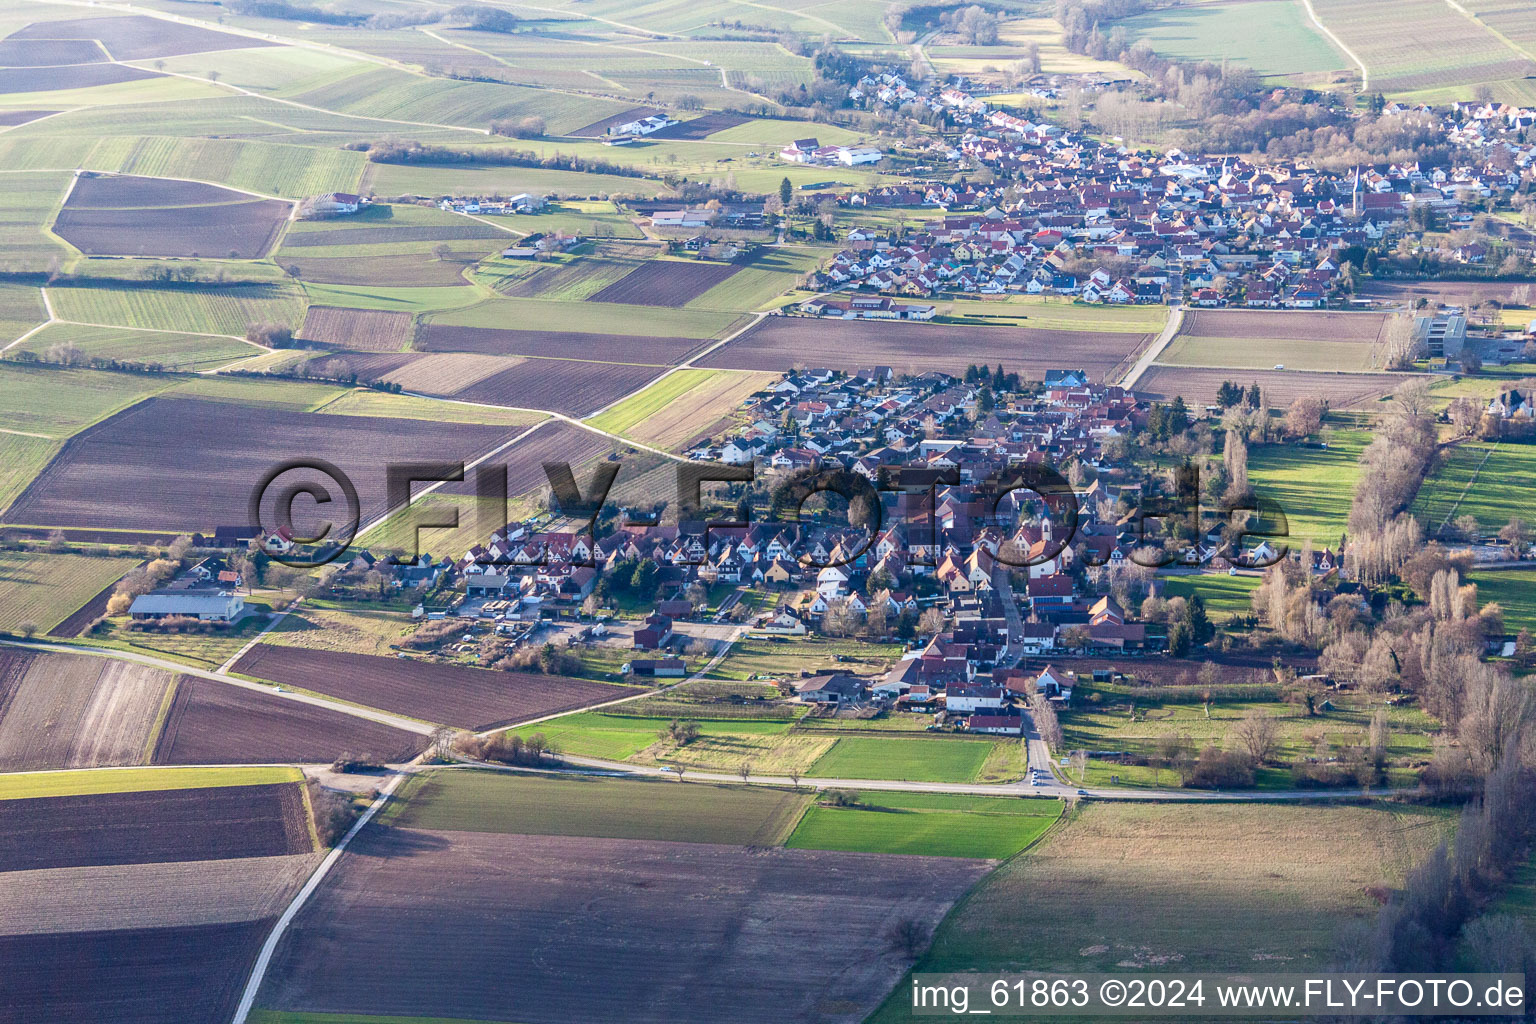 Town View of the streets and houses of the residential areas in the district Ingenheim in Billigheim-Ingenheim in the state Rhineland-Palatinate seen from above